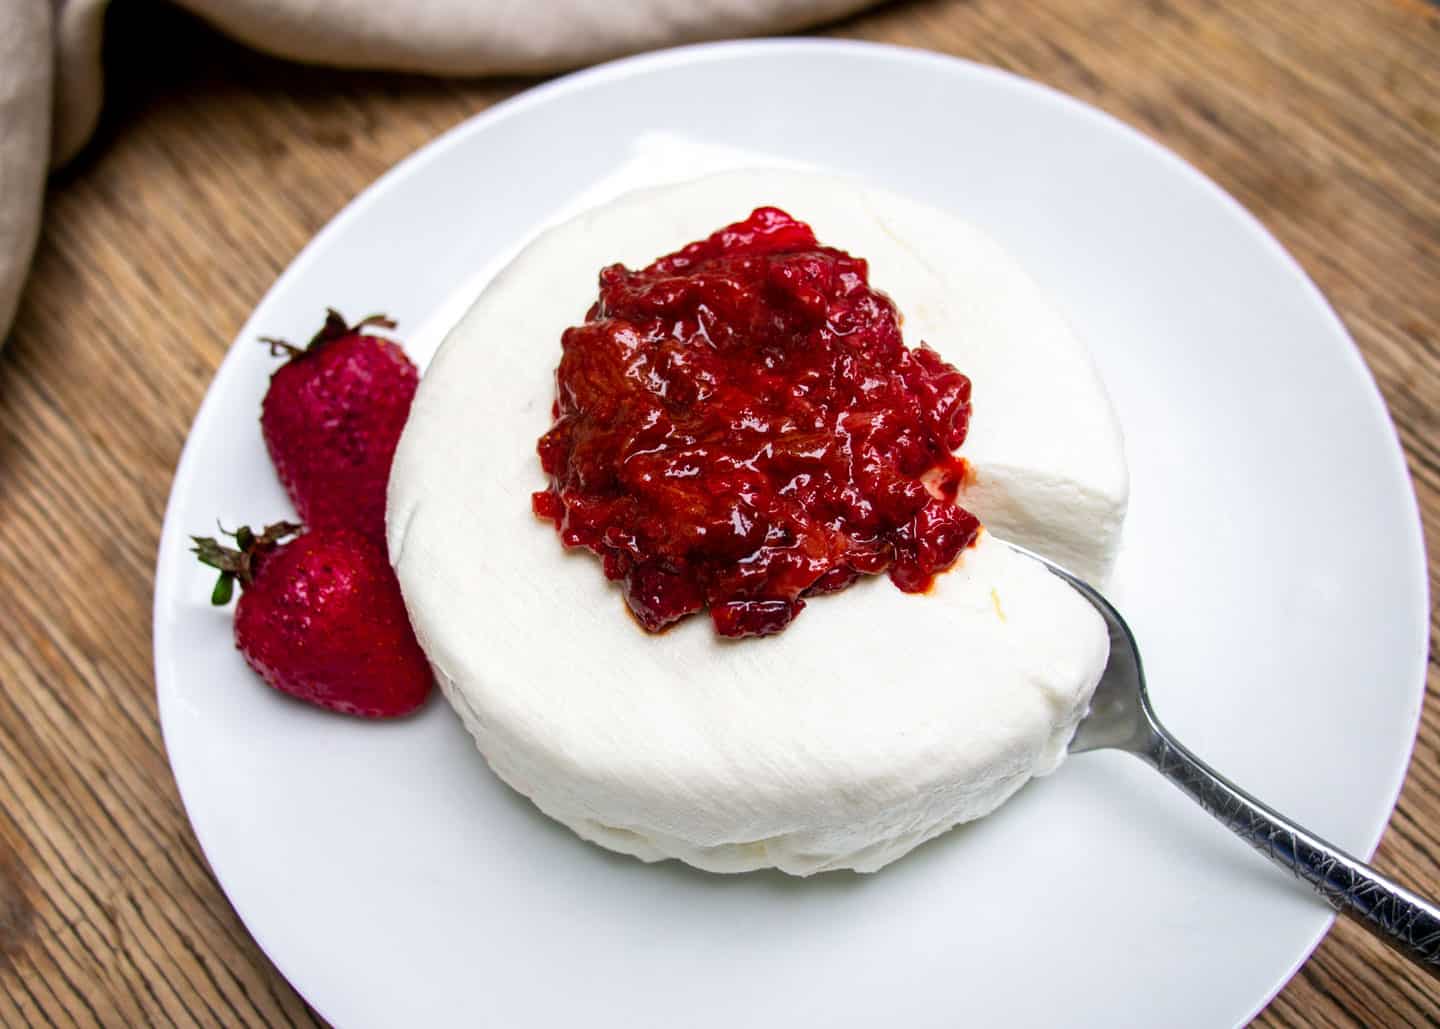 Labneh Cheesecake with Jam on Top